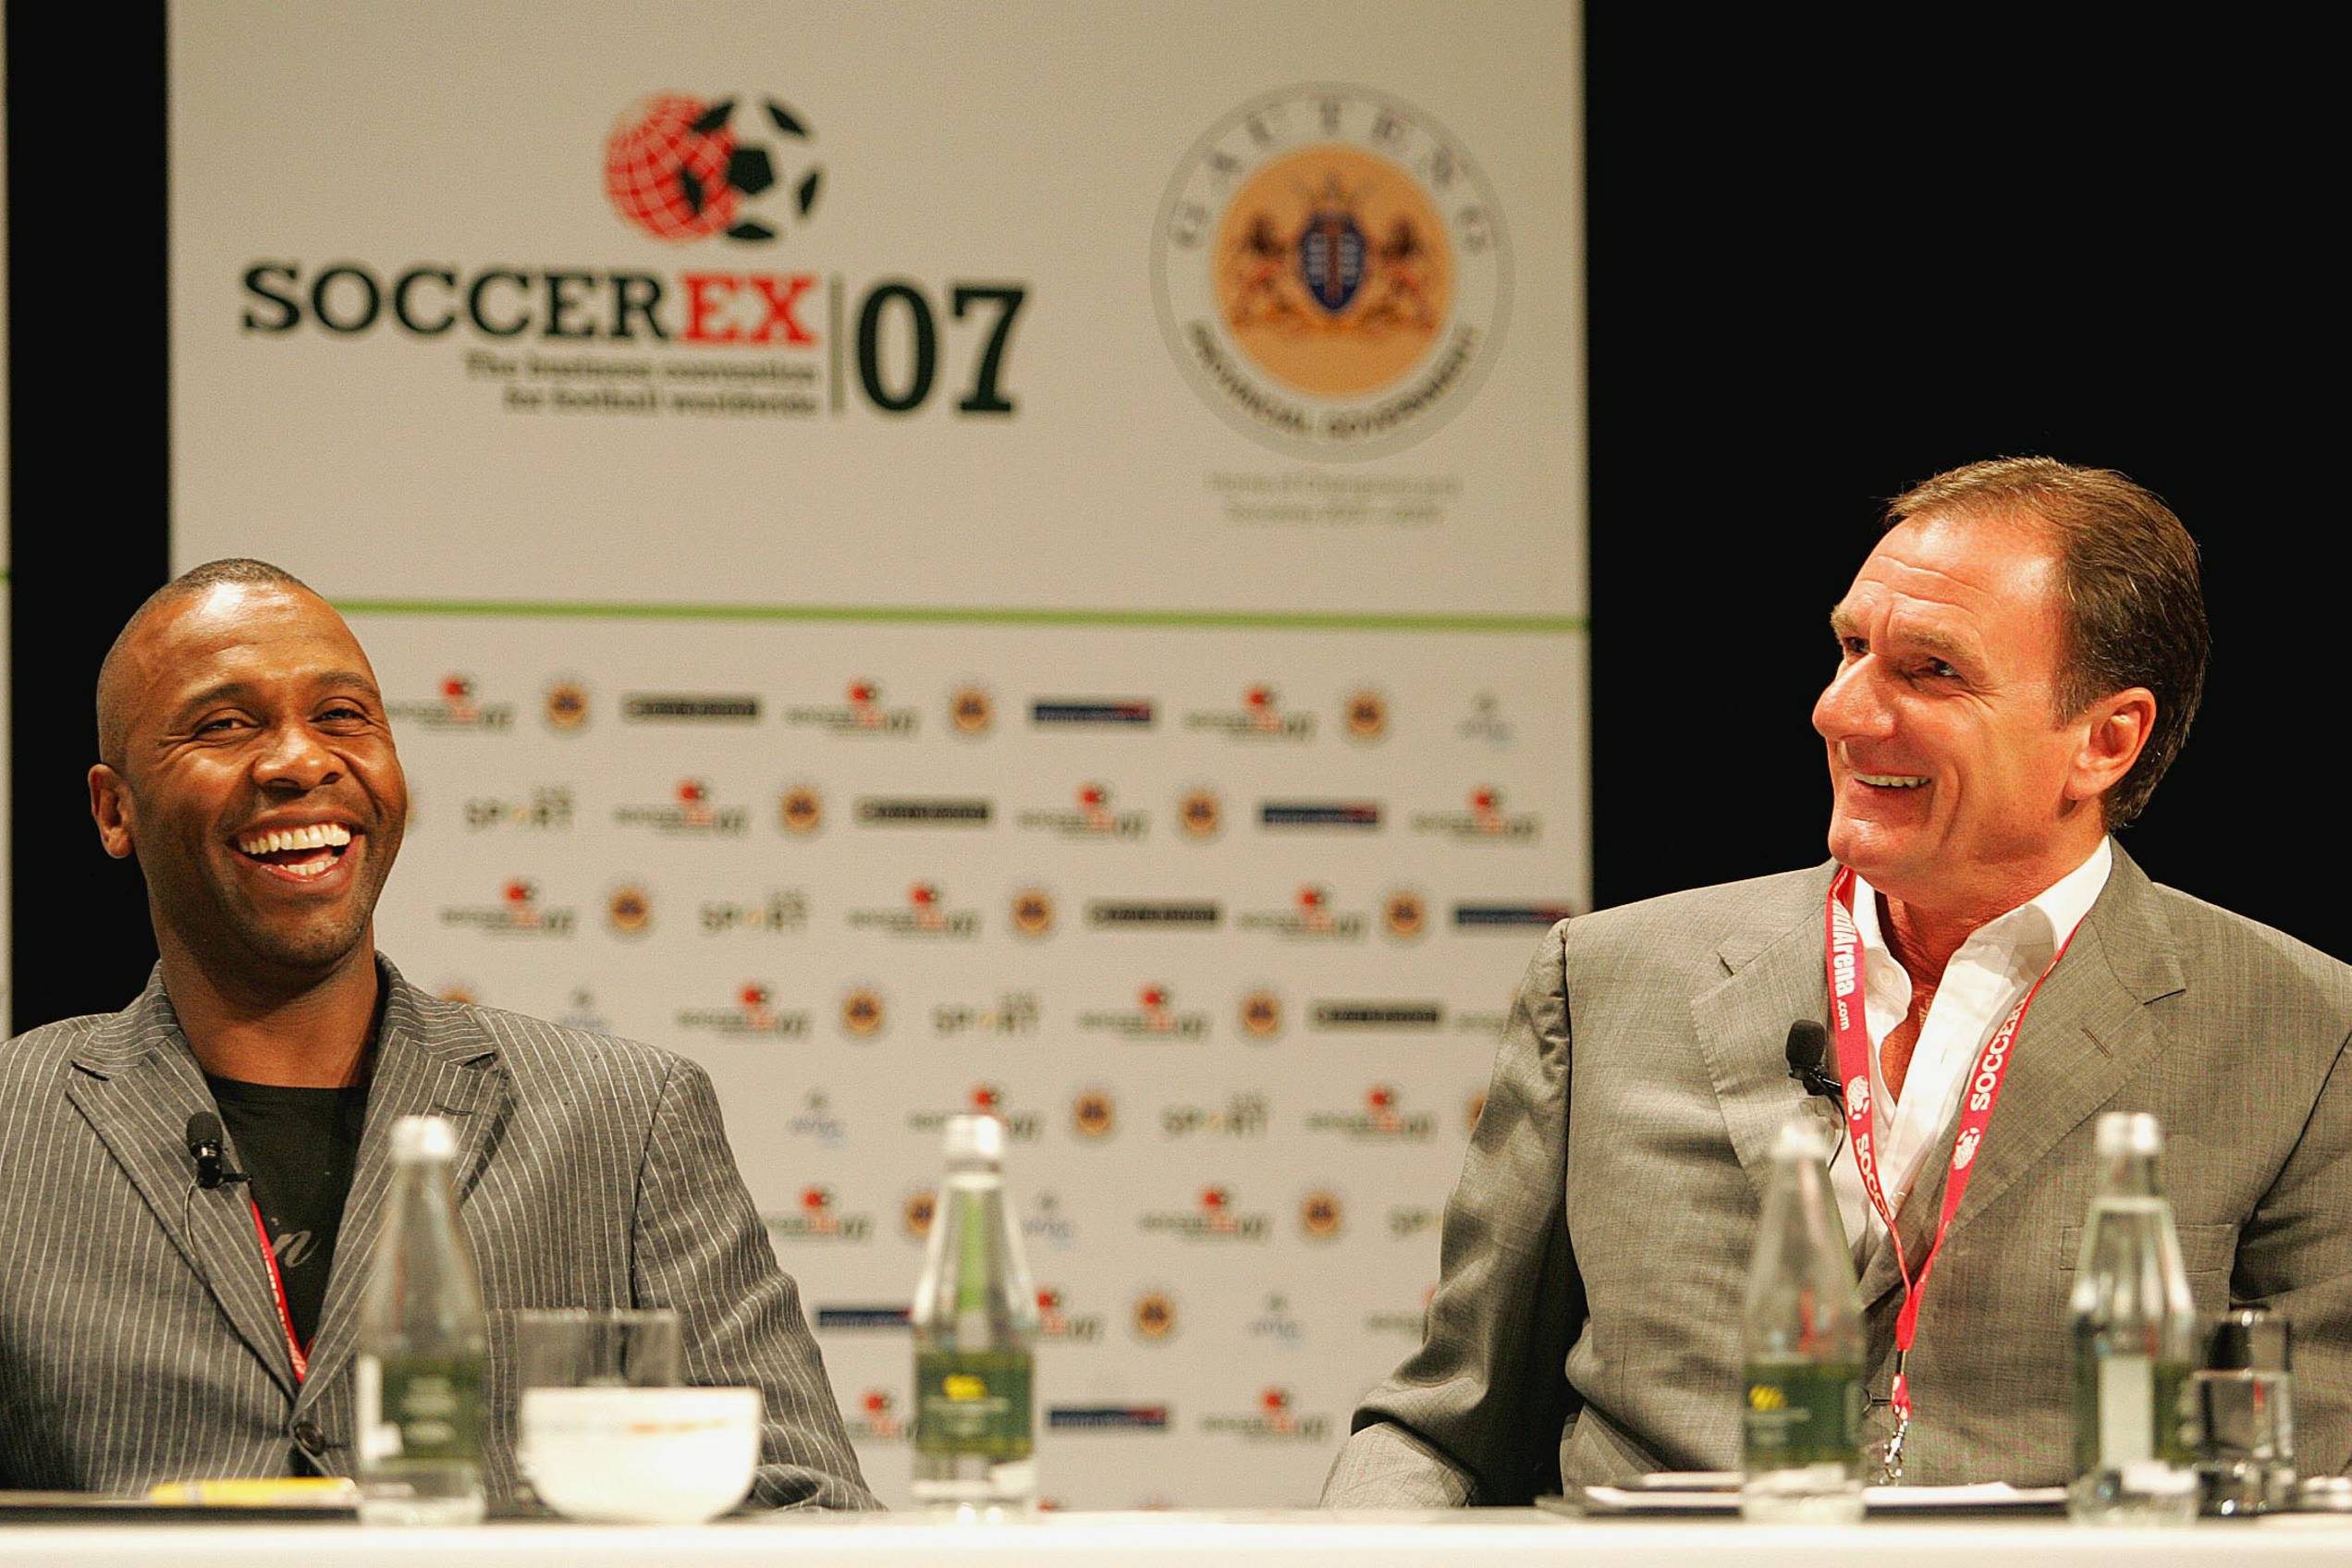 SANDTON, SOUTH AFRICA - NOVEMBER 28:  Former Leeds United captain Lucas Radebe and Phill Thompson, formerly of Liverpool during day 4 of the SoccerEx at Sandton Convention Centre on November 27, 2007 in Sandton, South Africa. (Photo by Lefty Shivambu/Gallo Images/Getty Images)